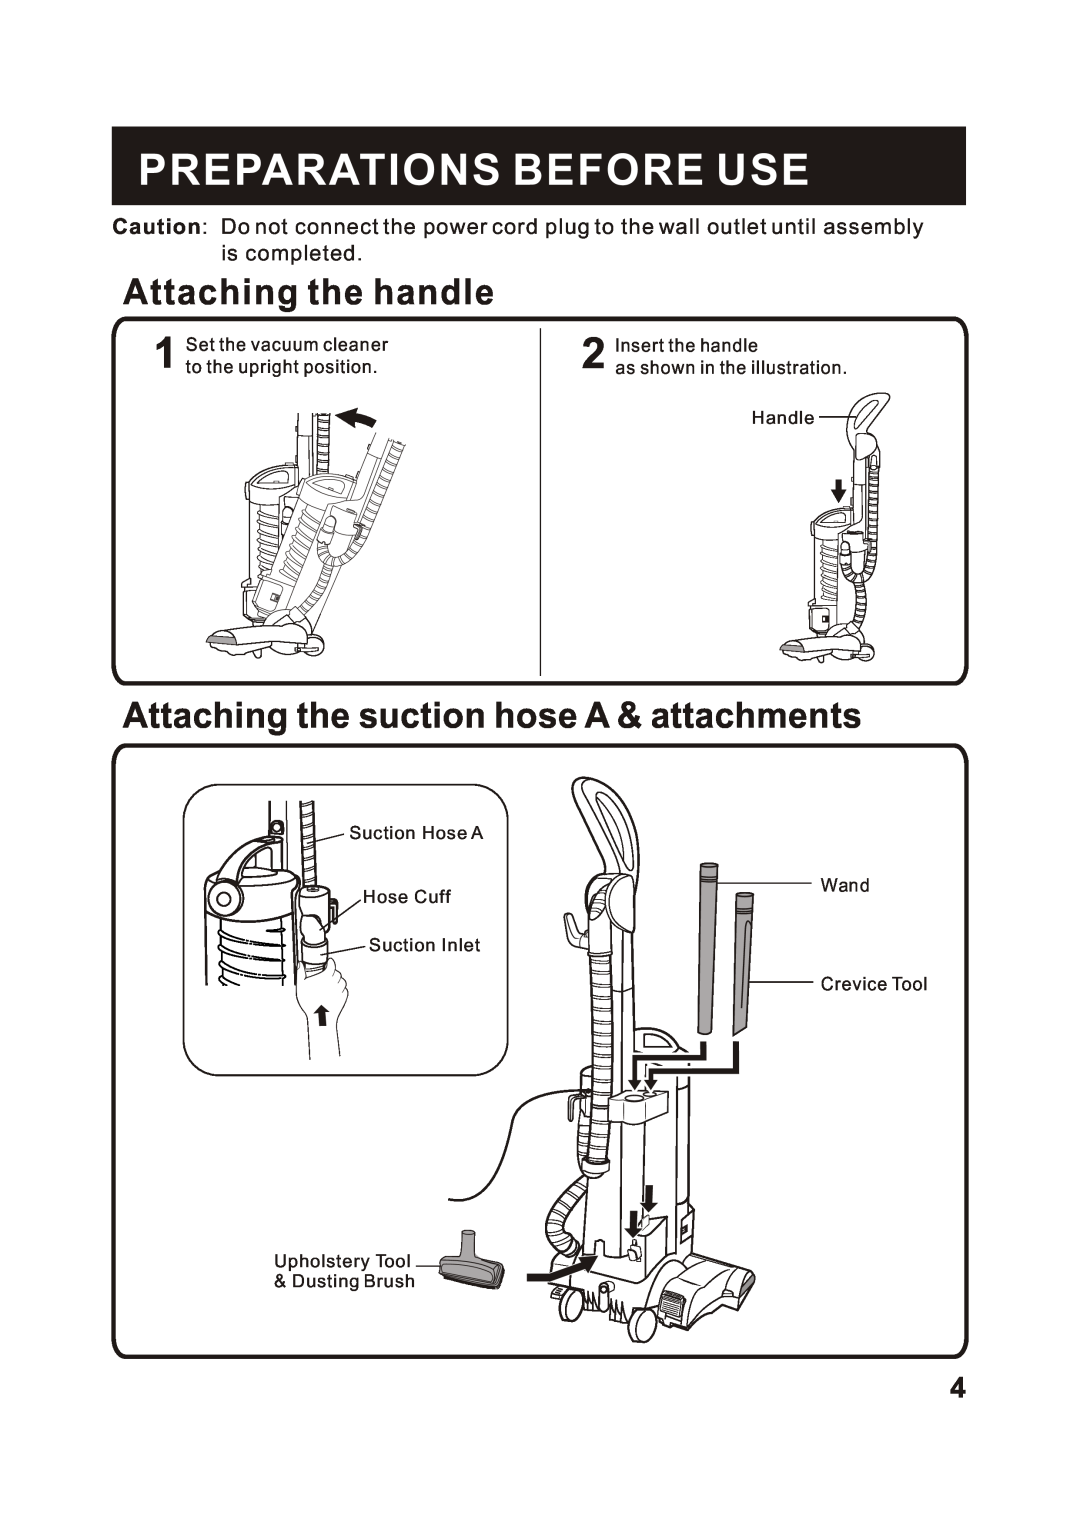 Fantom Vacuum FM744H Preparations Before Use, Attaching the handle, Attaching the suction hose A & attachments 